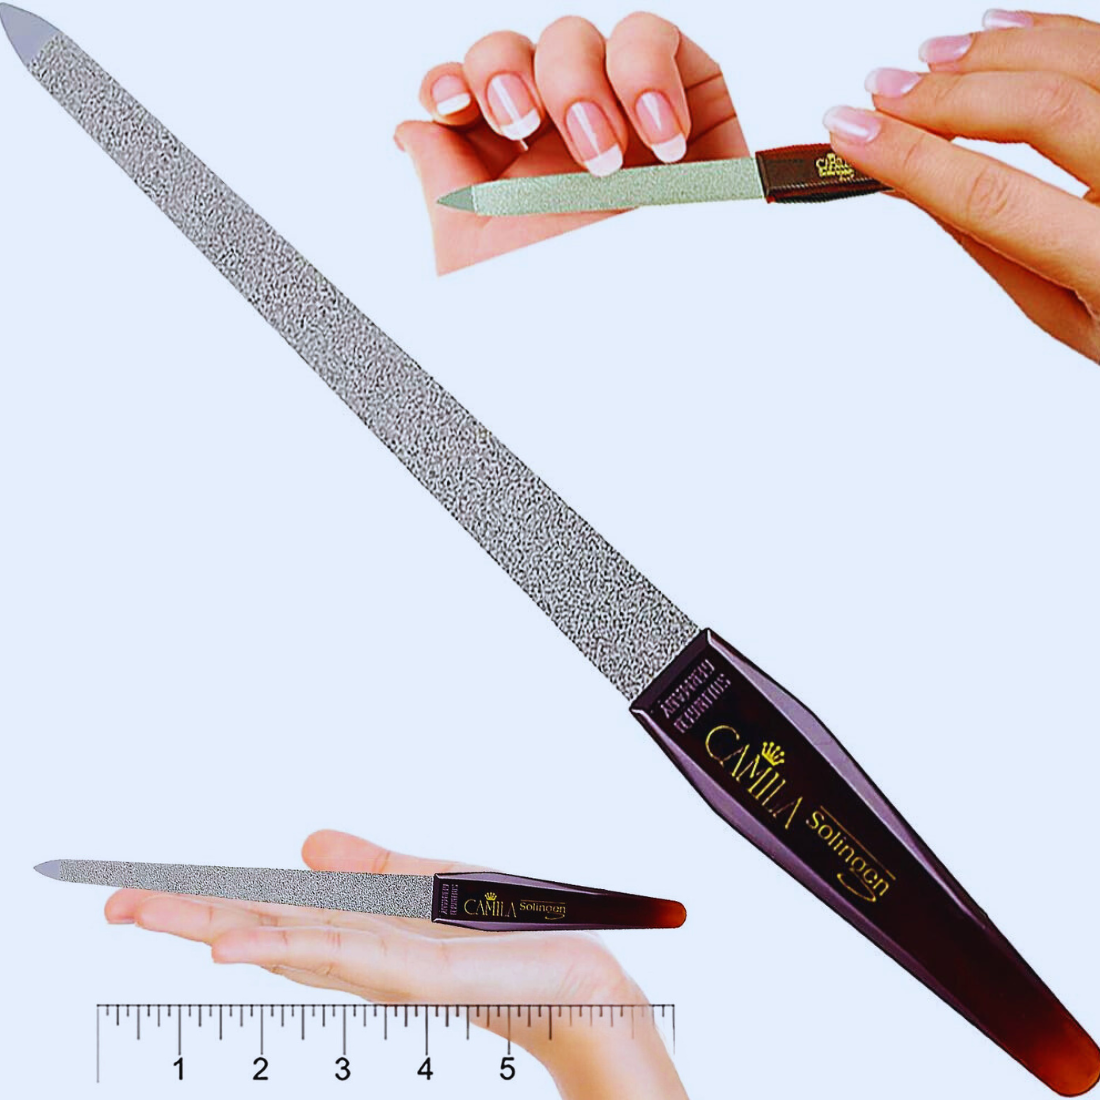 The Ultimate Guide to Metal Nail Files: 5 Top Products Reviewed